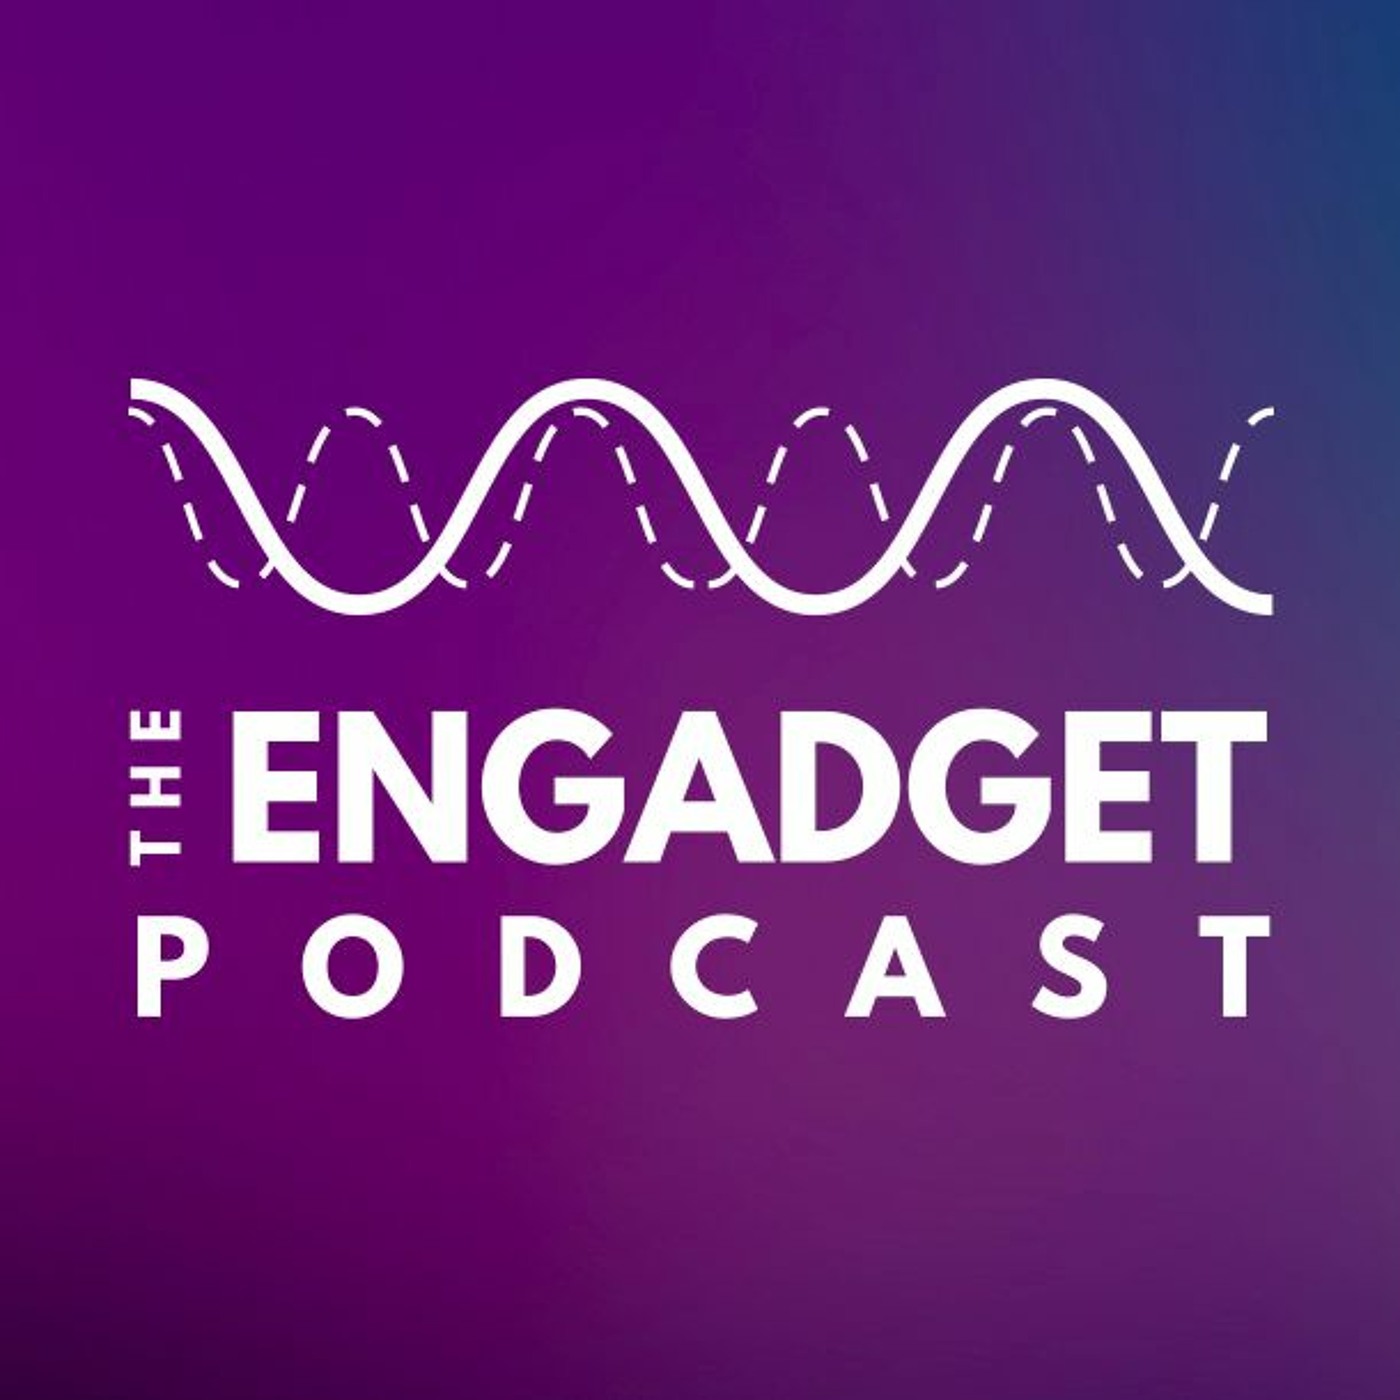 The Engadget Podcast Ep 9: What’s he building in there